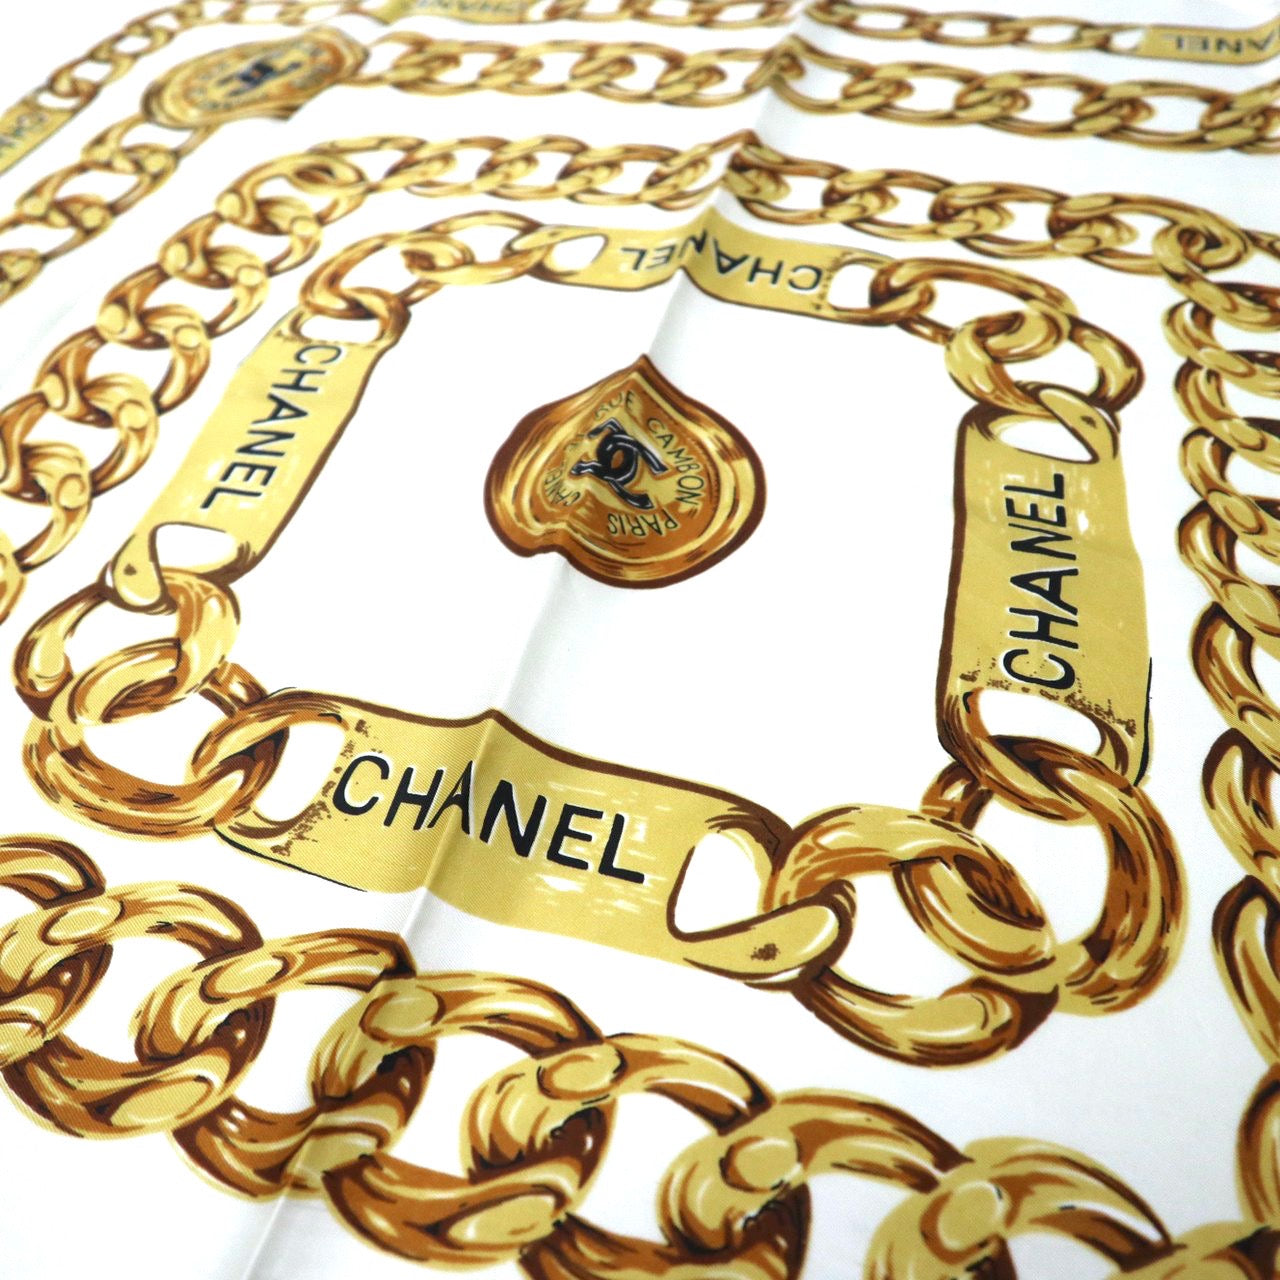 △CHANEL Scarf White Polyester Patterned Coco Mark Chain Jewelry 